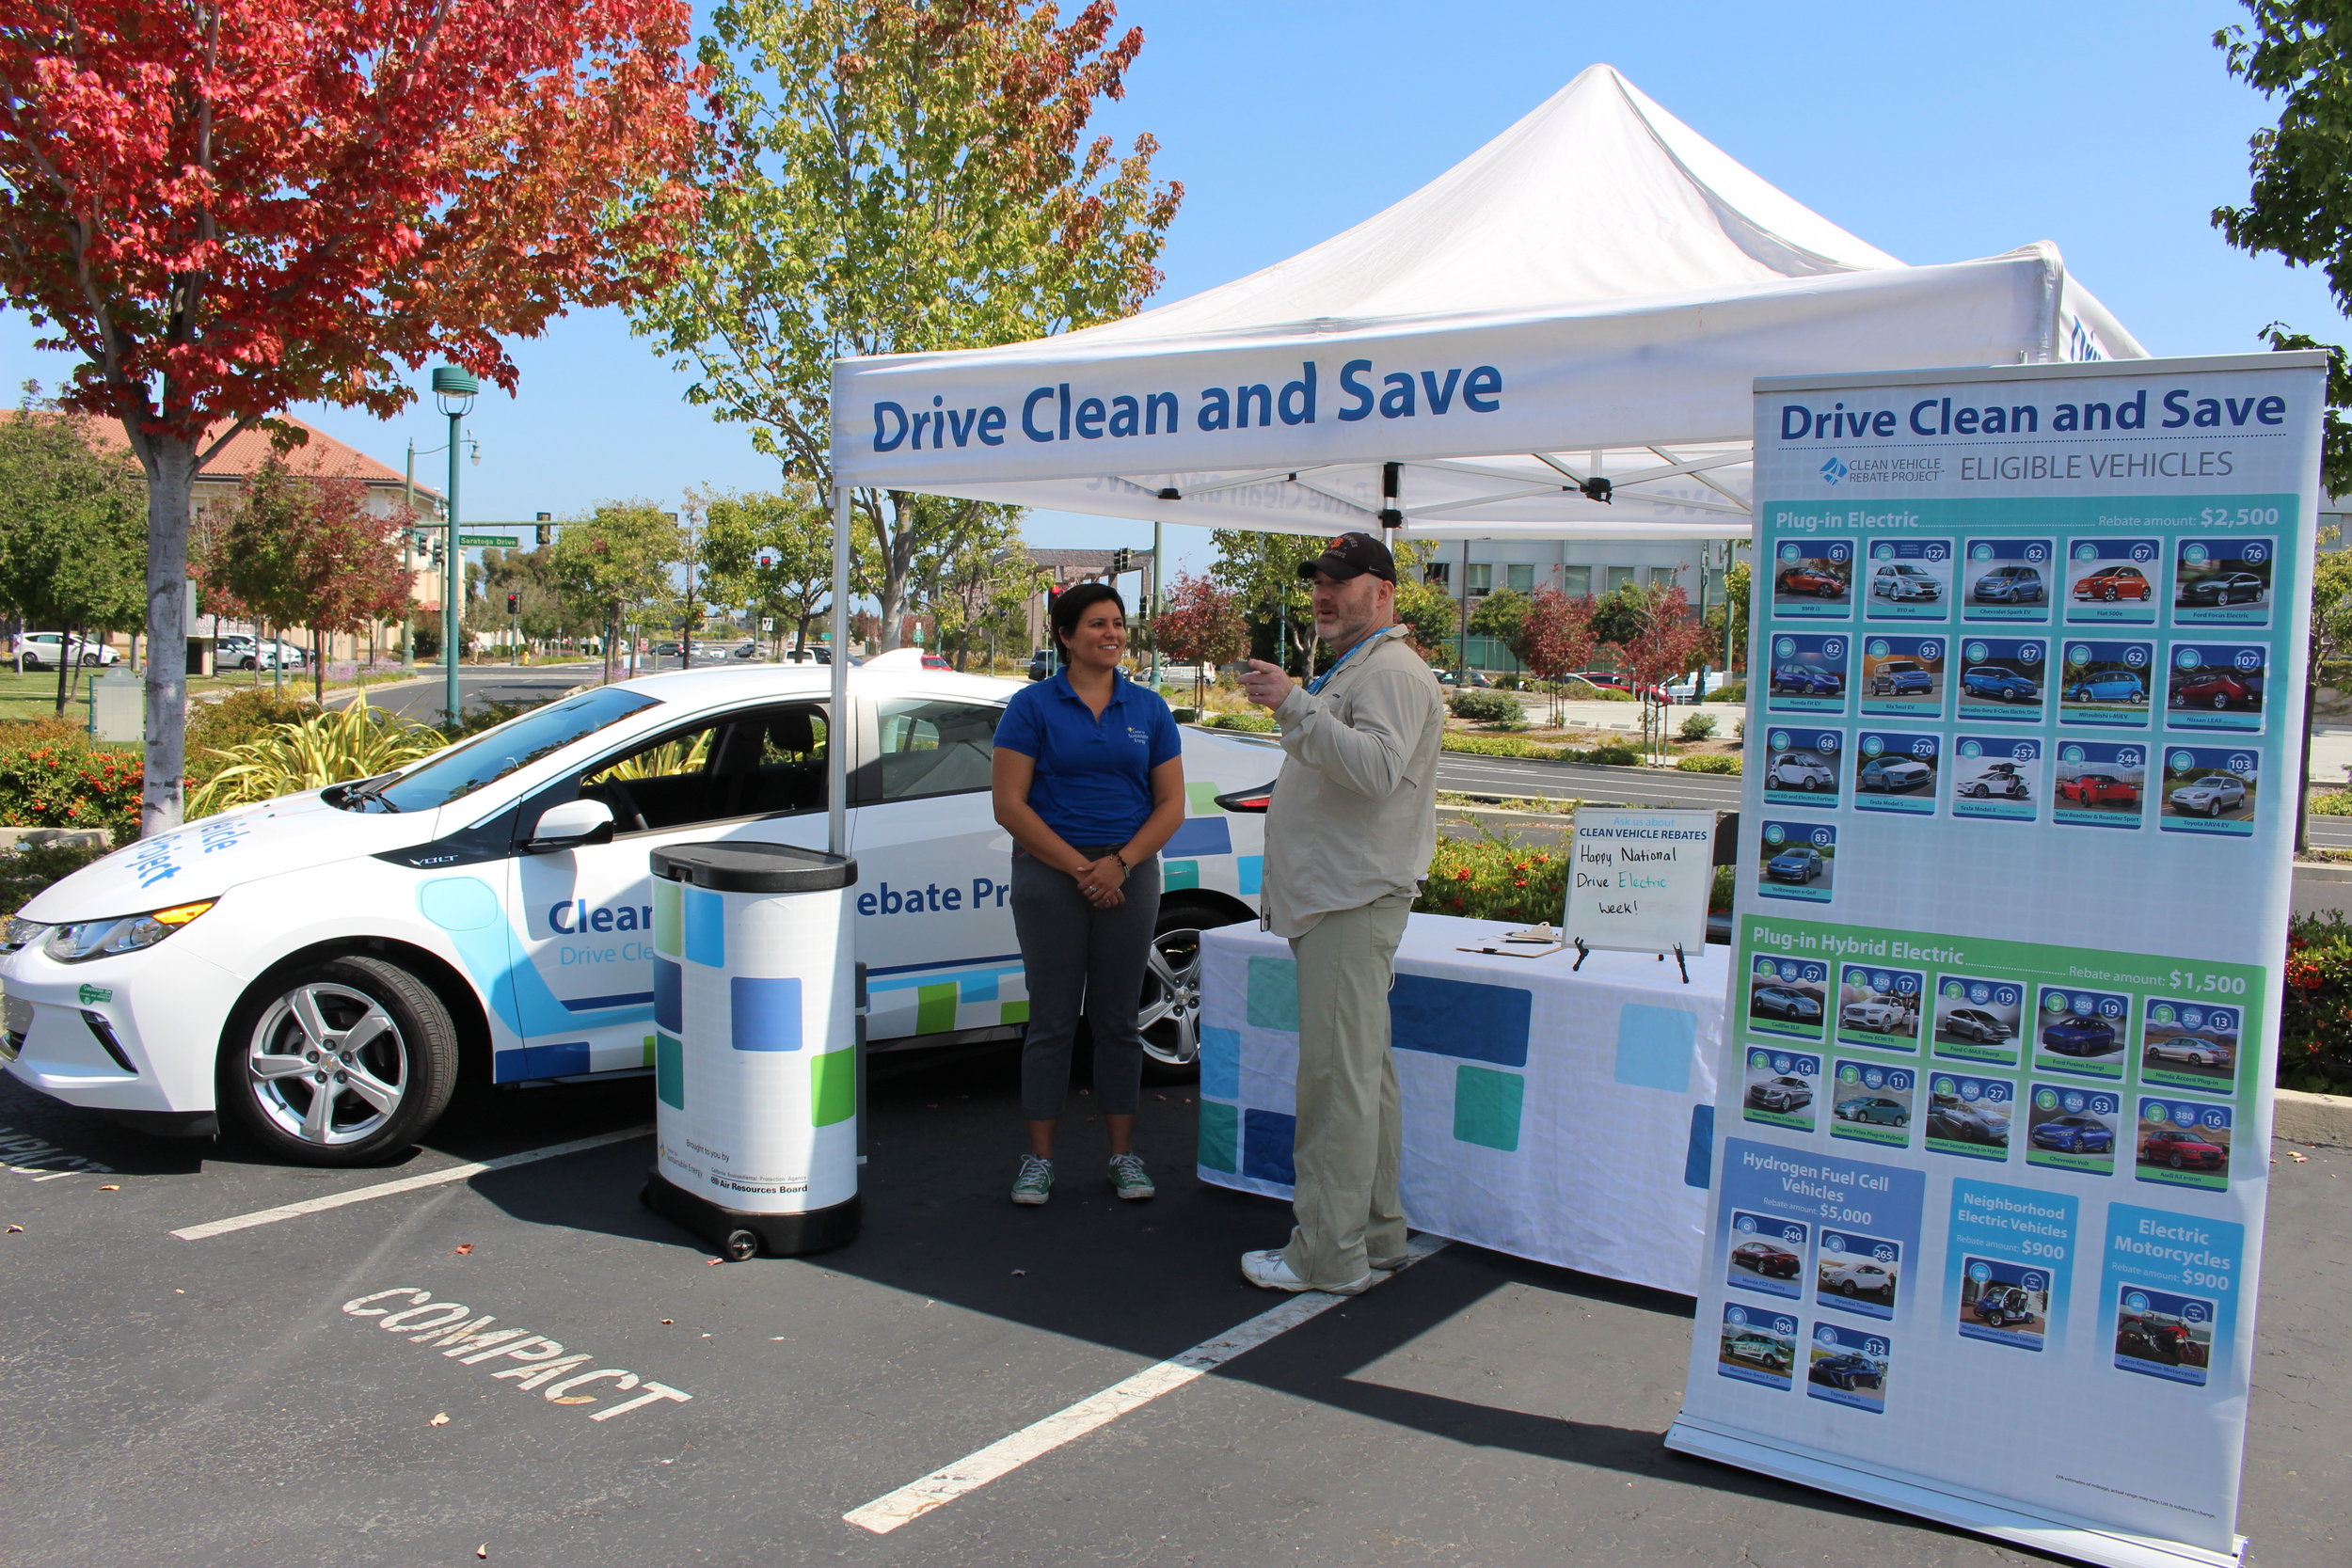 rebates-expand-community-access-to-clean-vehicles-california-climate